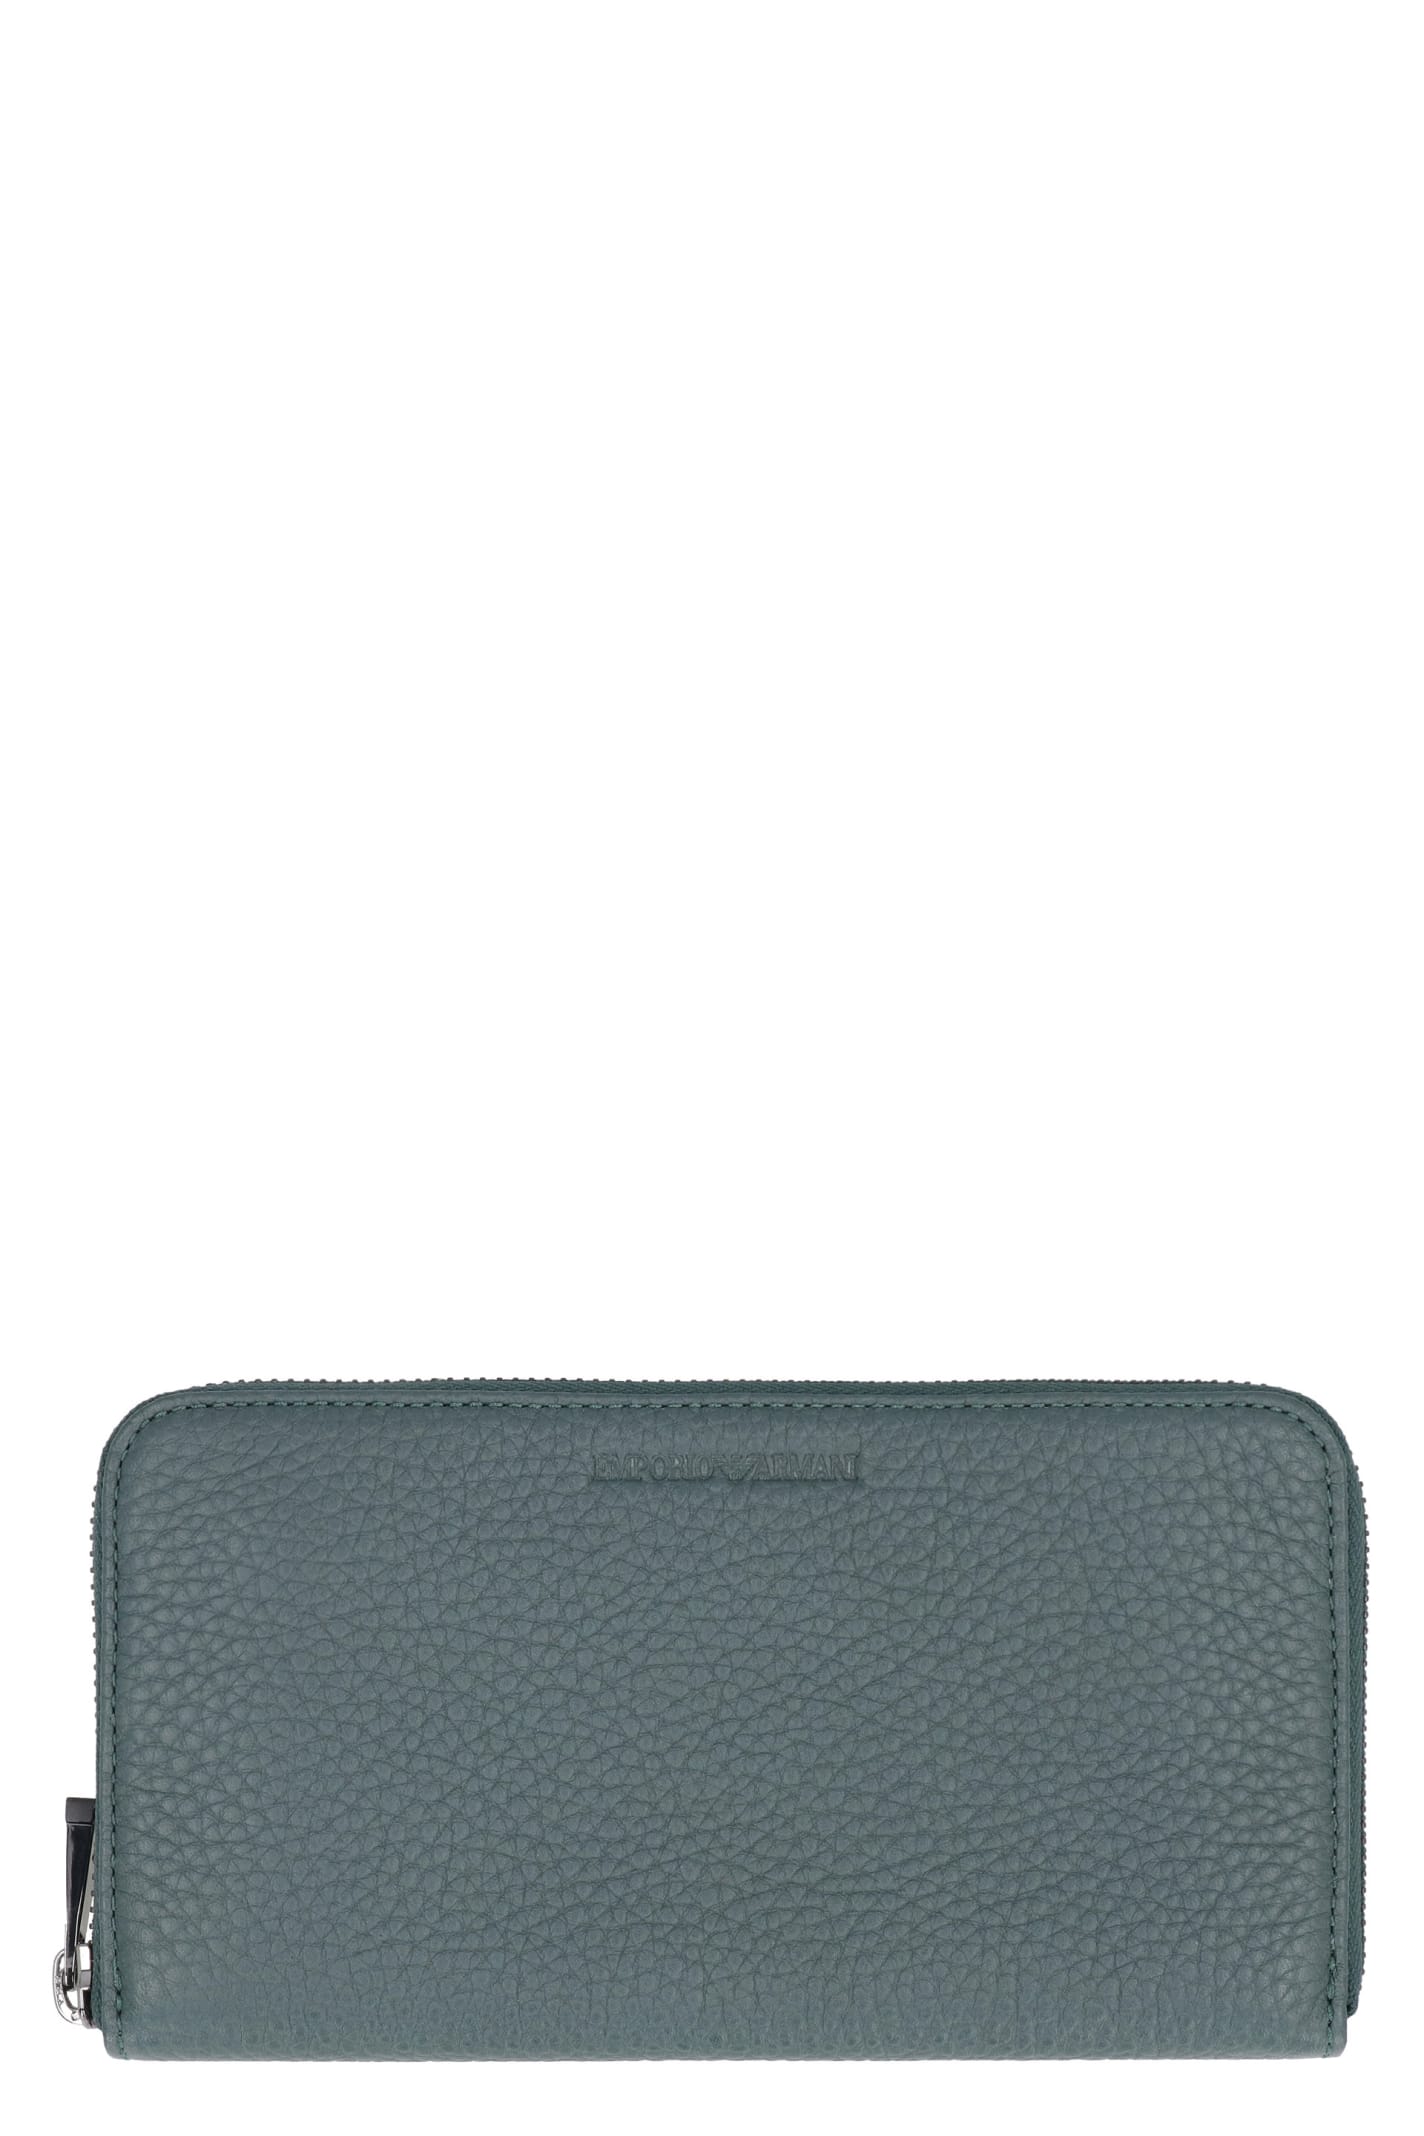 Emporio Armani Leather Zip Around Wallet In Green